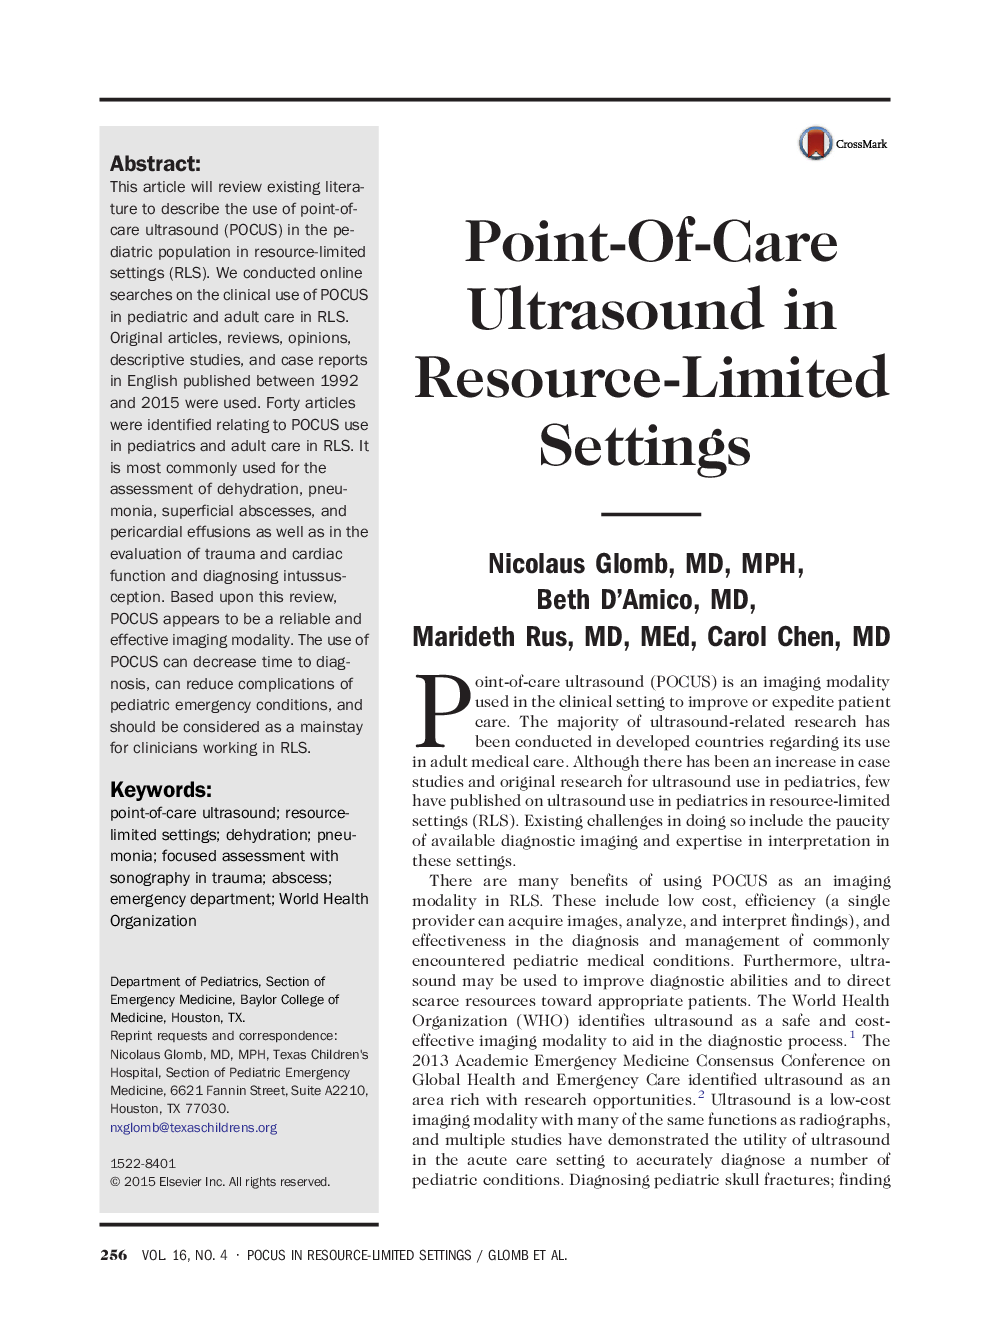 Point-Of-Care Ultrasound in Resource-Limited Settings 